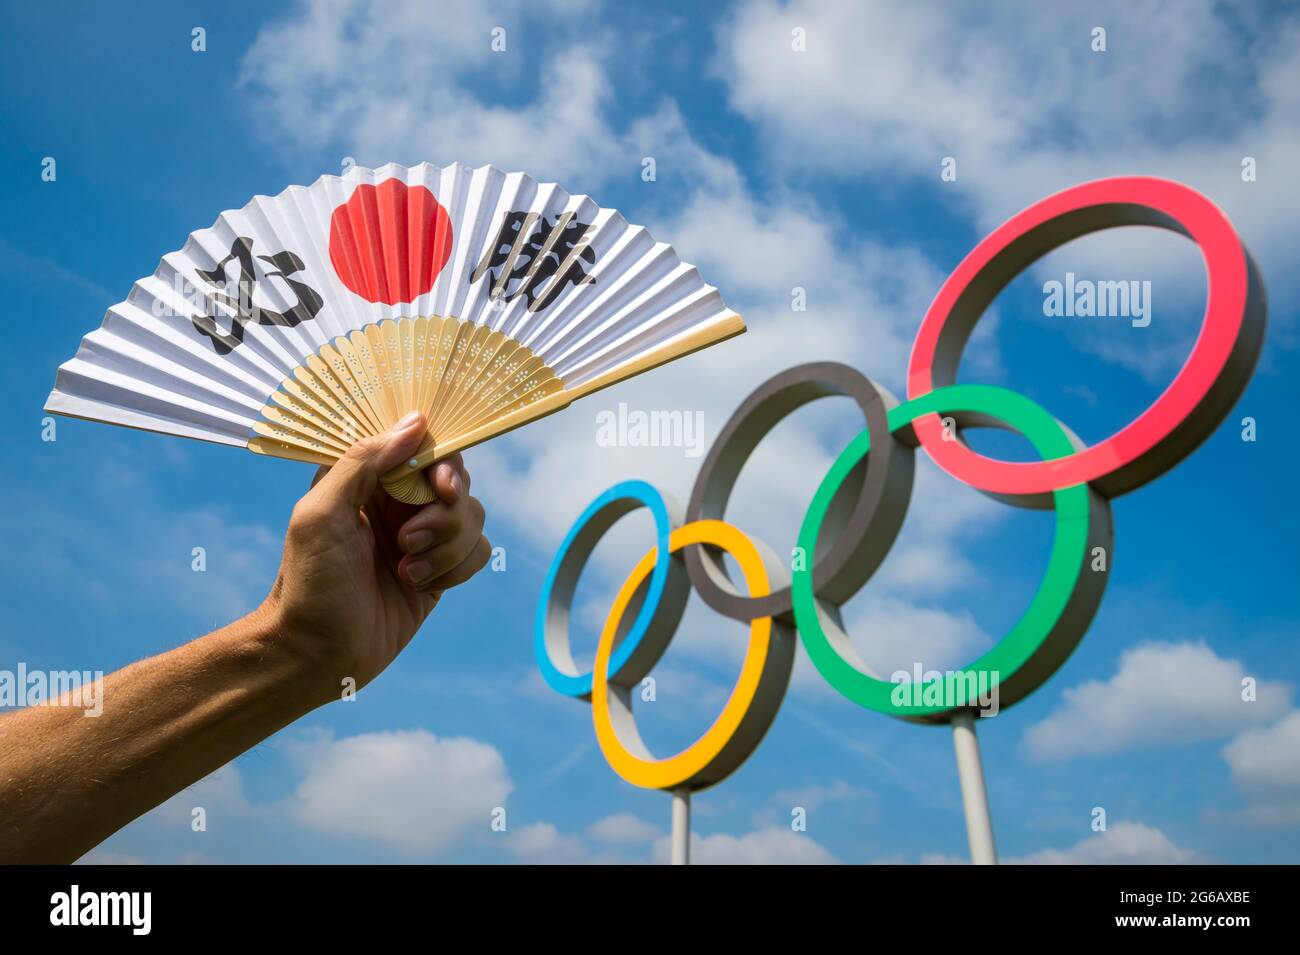 RIO DE JANEIRO - MARCH, 2016: Hand holding a fan decorated with Japanese kanji characters spelling out hissho (English translation: certain victory) i Stock Photo